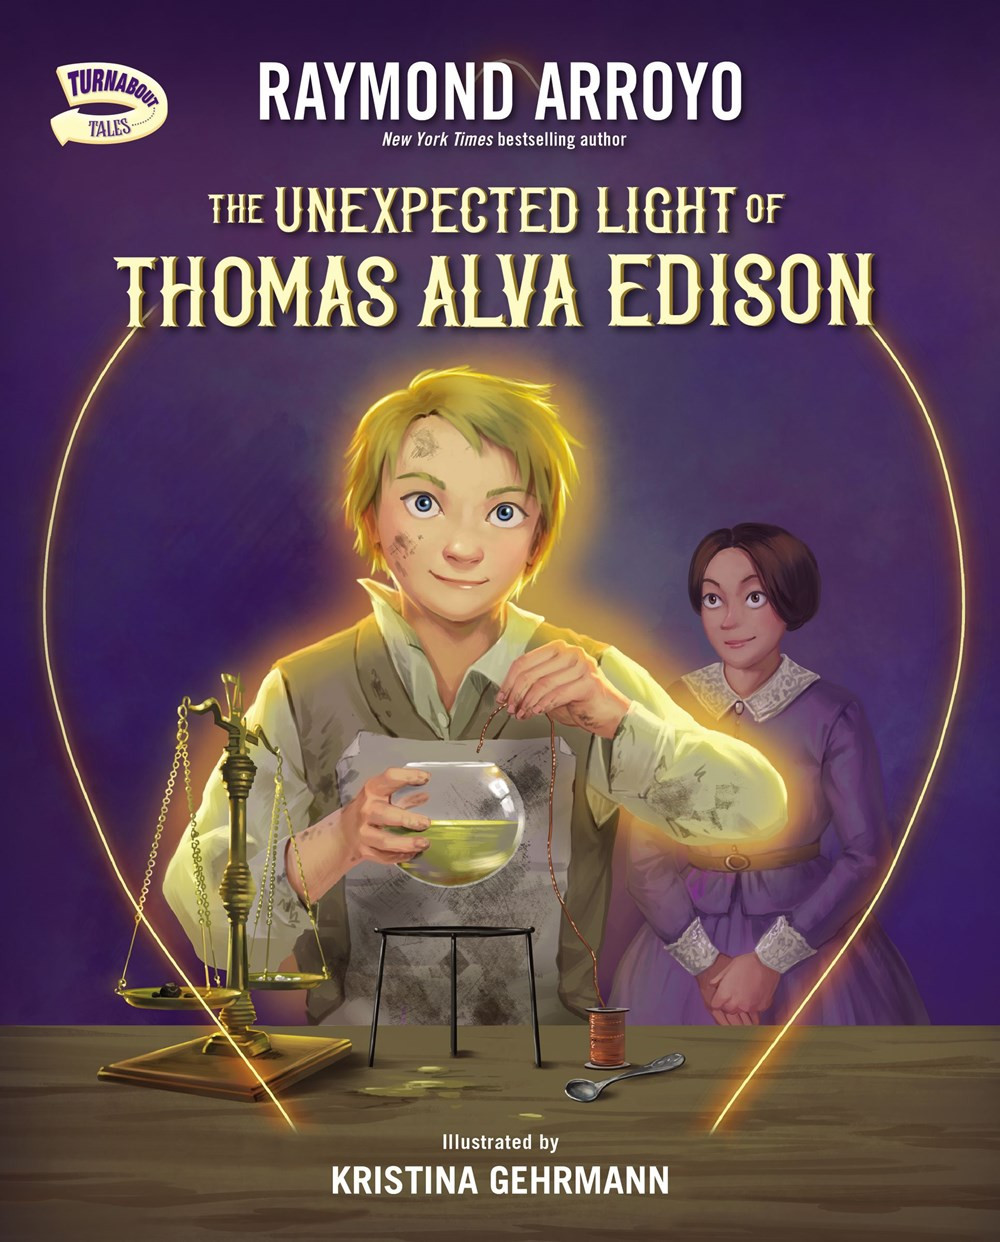 The Unexpected Light of Thomas Alva Edison (Turnabout Tales) by Raymond Arroyo